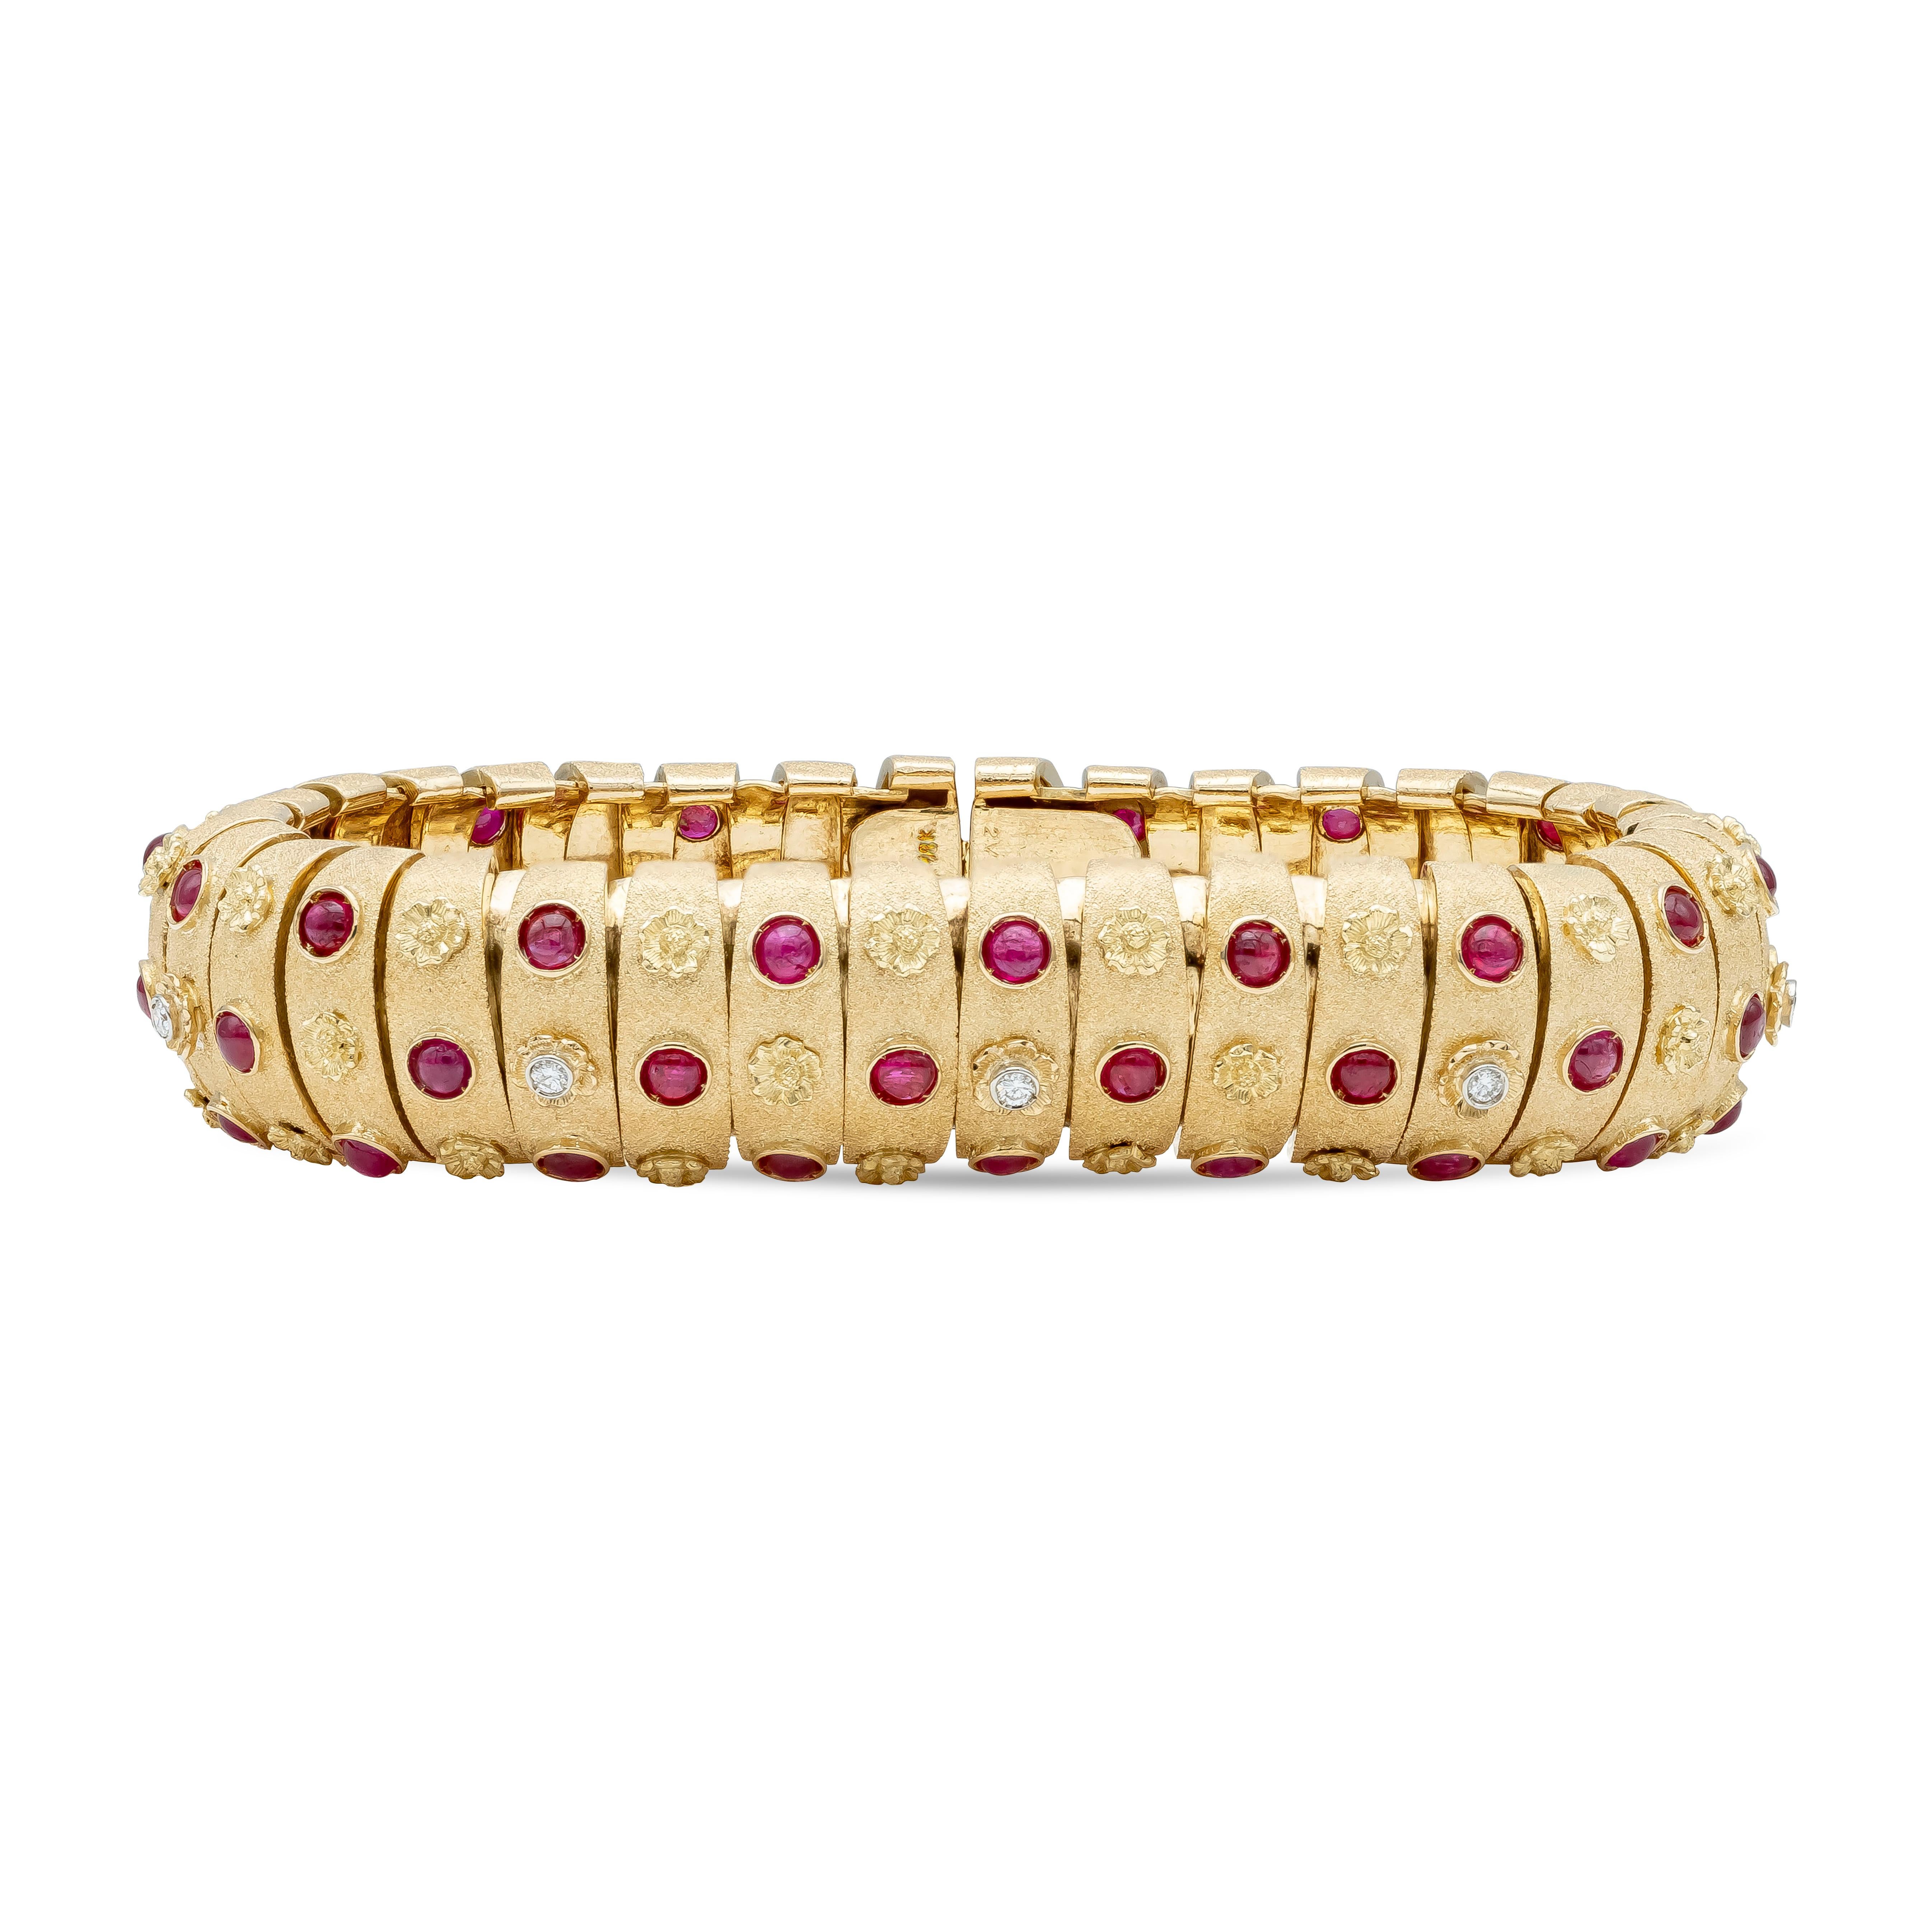 This ravishing vintage gold bracelet from Van Cleef & Arpels features a solid 18K Yellow Gold Bracelet with Cabochon Rubies weighing 10.80 carats total, and Round White Diamonds weighing 0.35 carats. Elegantly alternates with a flower embossed